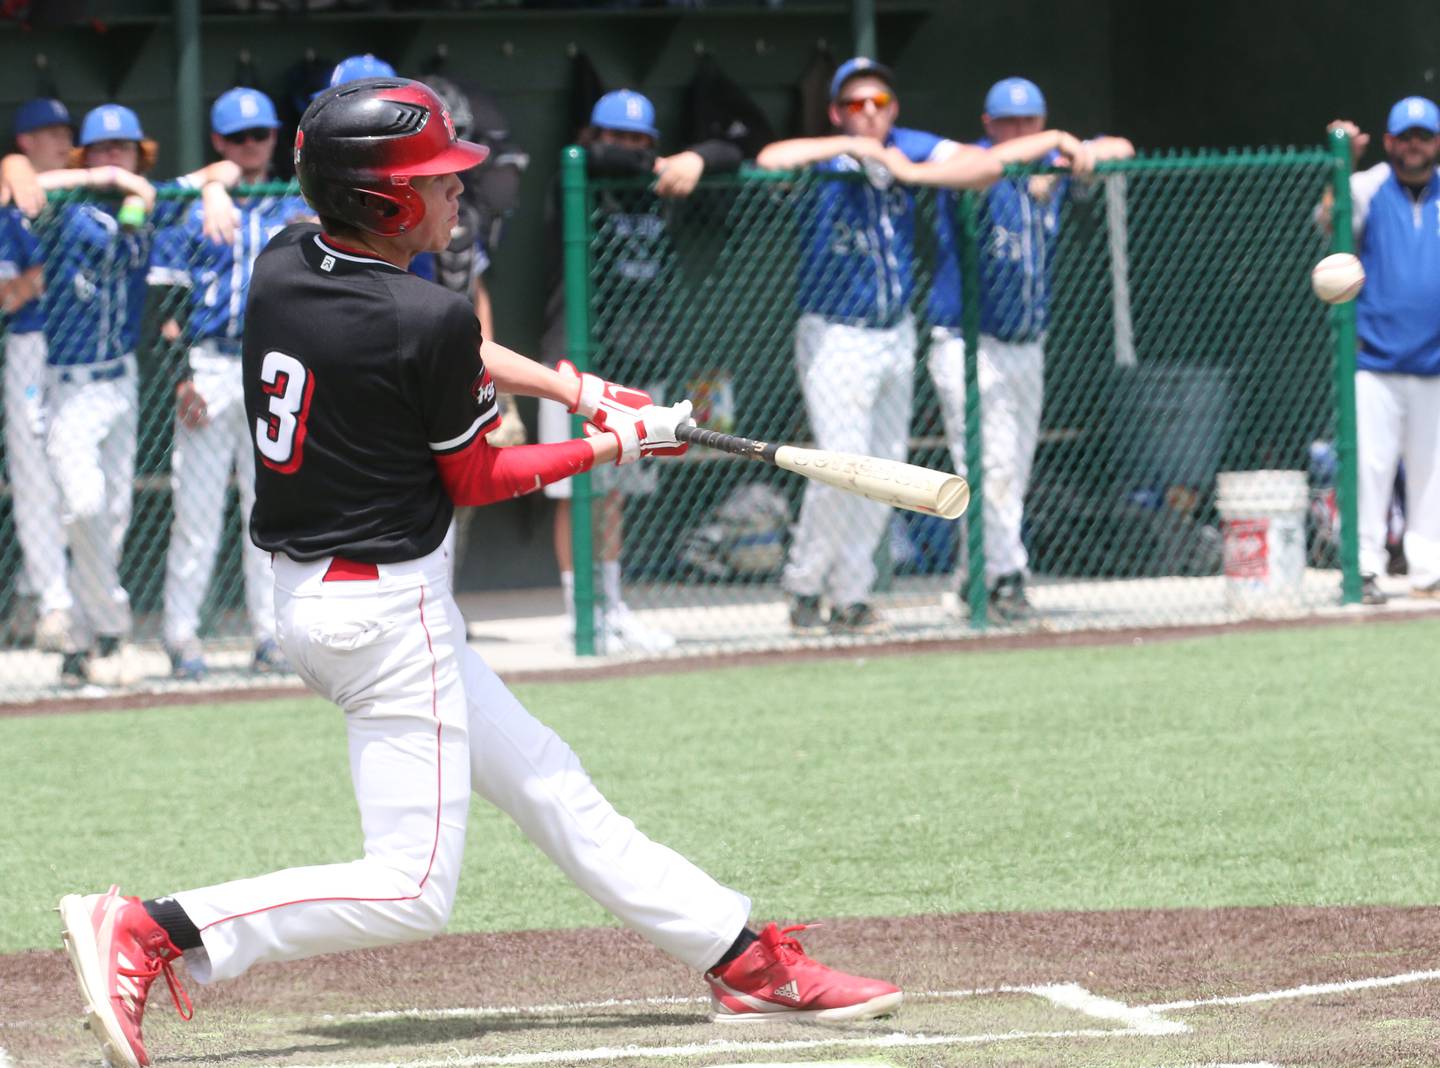 Henry-Senachwine's Zachary Barnes smacks a hit against Milford during the Class 1A Supersectional game on Monday, May 29, 2023 at Illinois Wesleyan University in Bloomington.